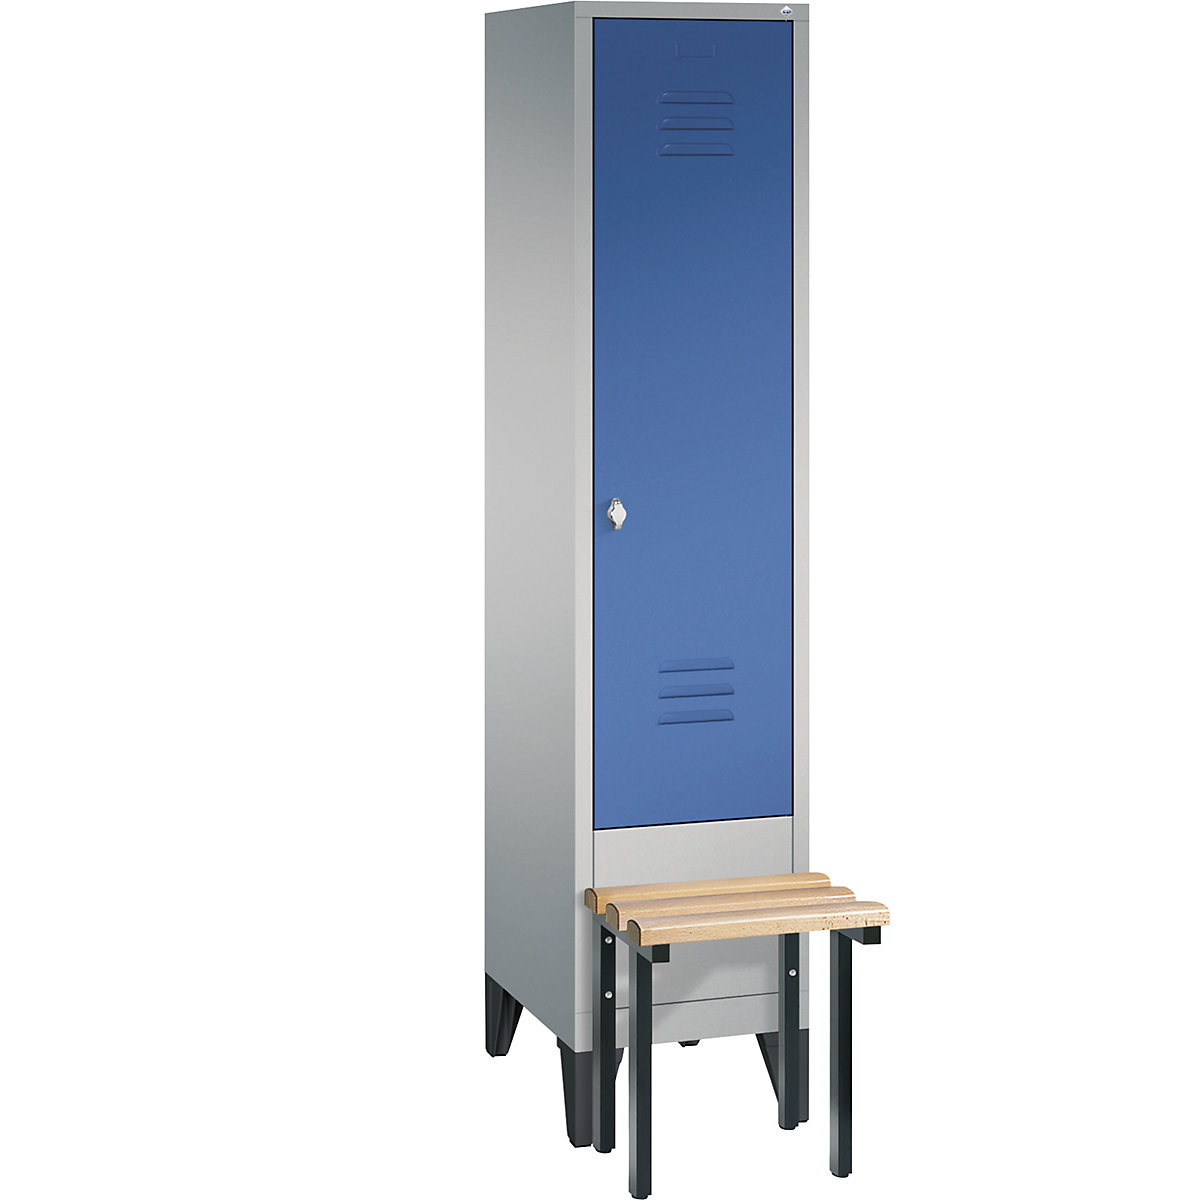 CLASSIC cloakroom locker with bench mounted in front – C+P, 1 compartment, compartment width 400 mm, white aluminium / gentian blue-9